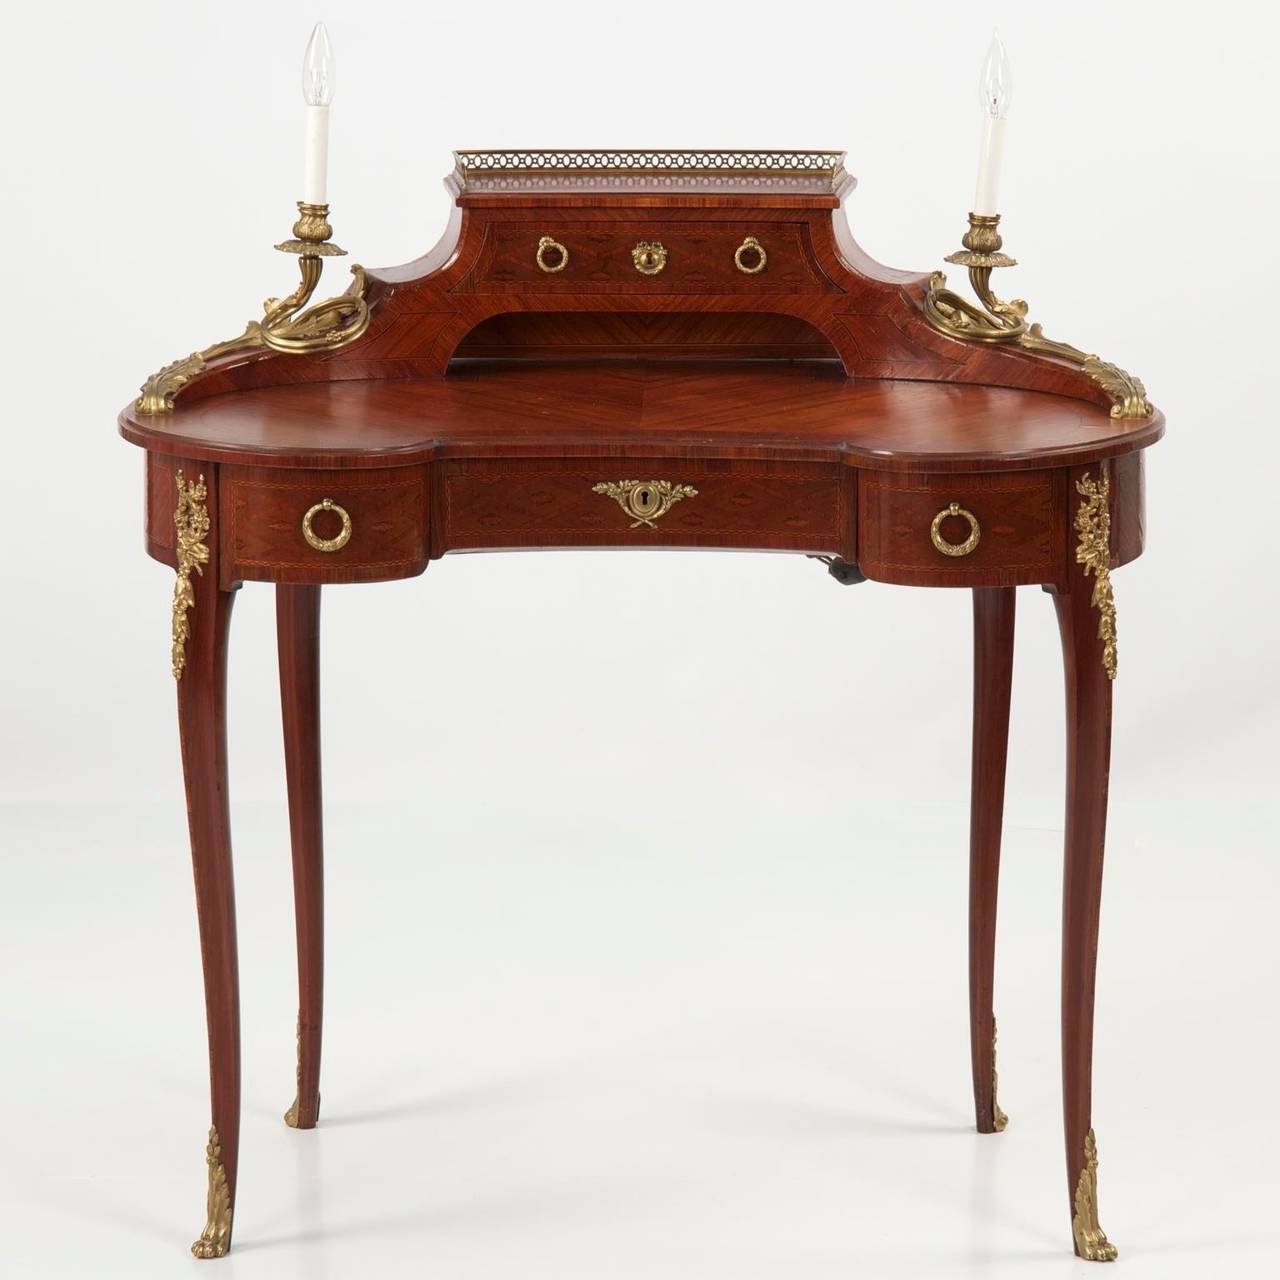 An exquisitely crafted kidney form writing desk in the Louis XV taste, the desk is a vision of delicate and endlessly undulating lines.  Having almost no hard angles, the design is magnetic and executed with precision.  The open writing surface is